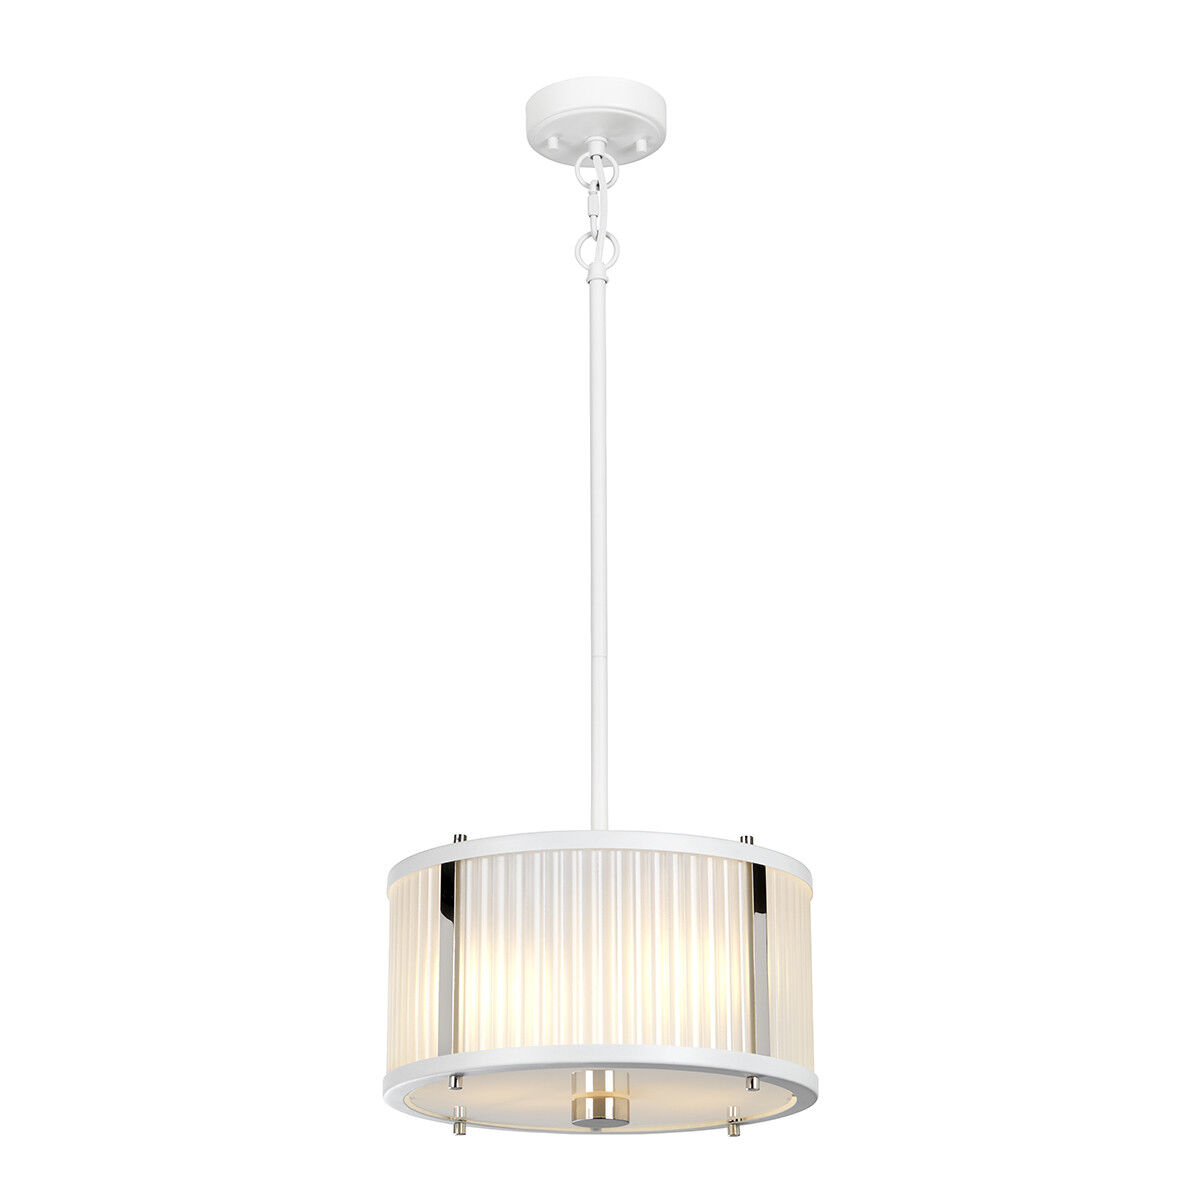 Elstead Lighting Corona Cylindrical 2 Light Pendant, White Polished Nickel, Frosted Glass